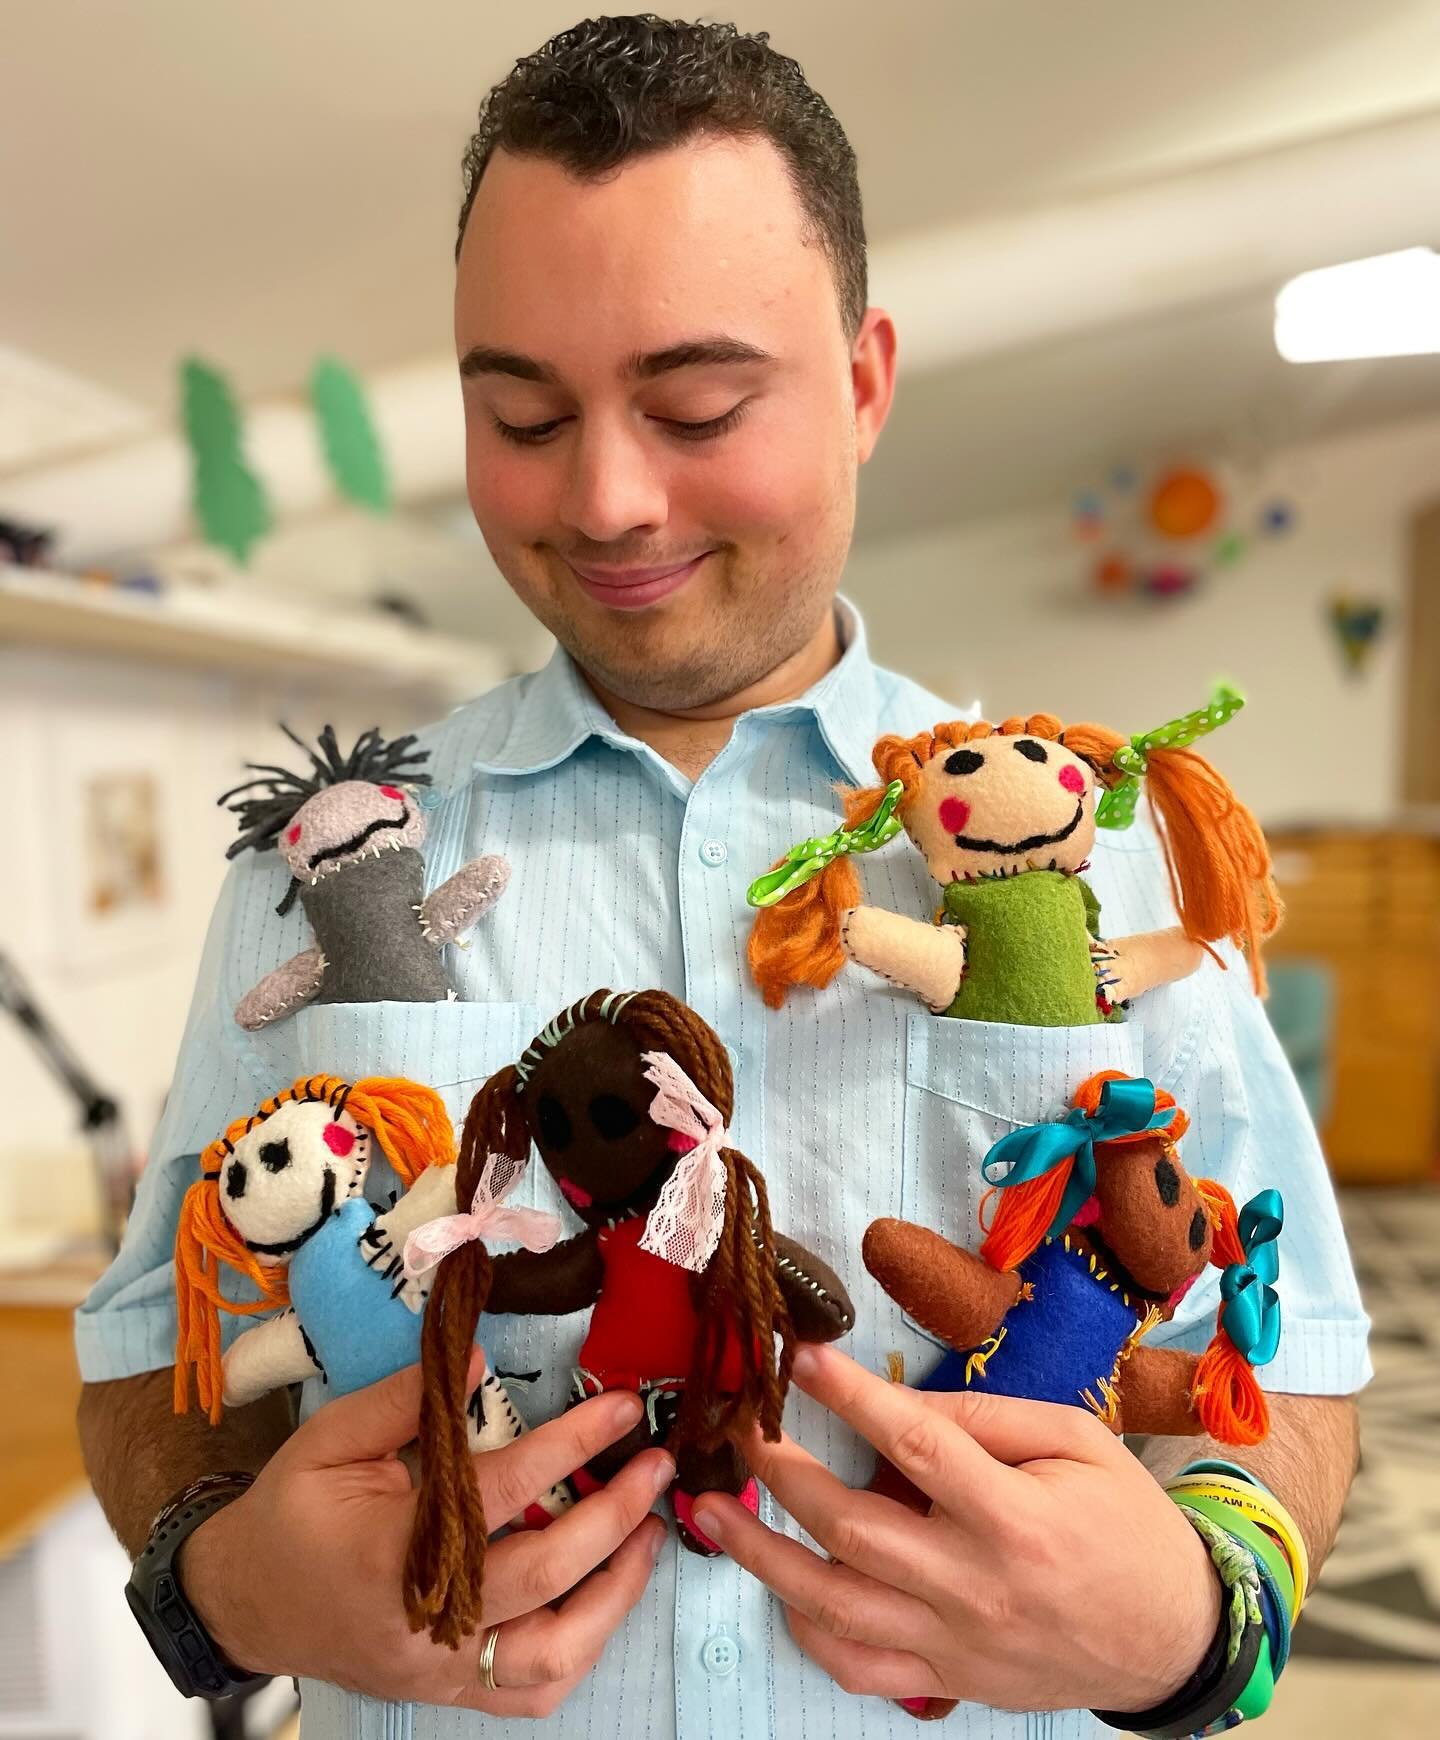 Wishing y&rsquo;all a Monday as sweet as this new troop of original Davis Wohlford dolls. 
.
.
.
Image description: Davis wears a blue colored shirt and holds 5 handmade dolls, 2 of which are in his shirt pockets.